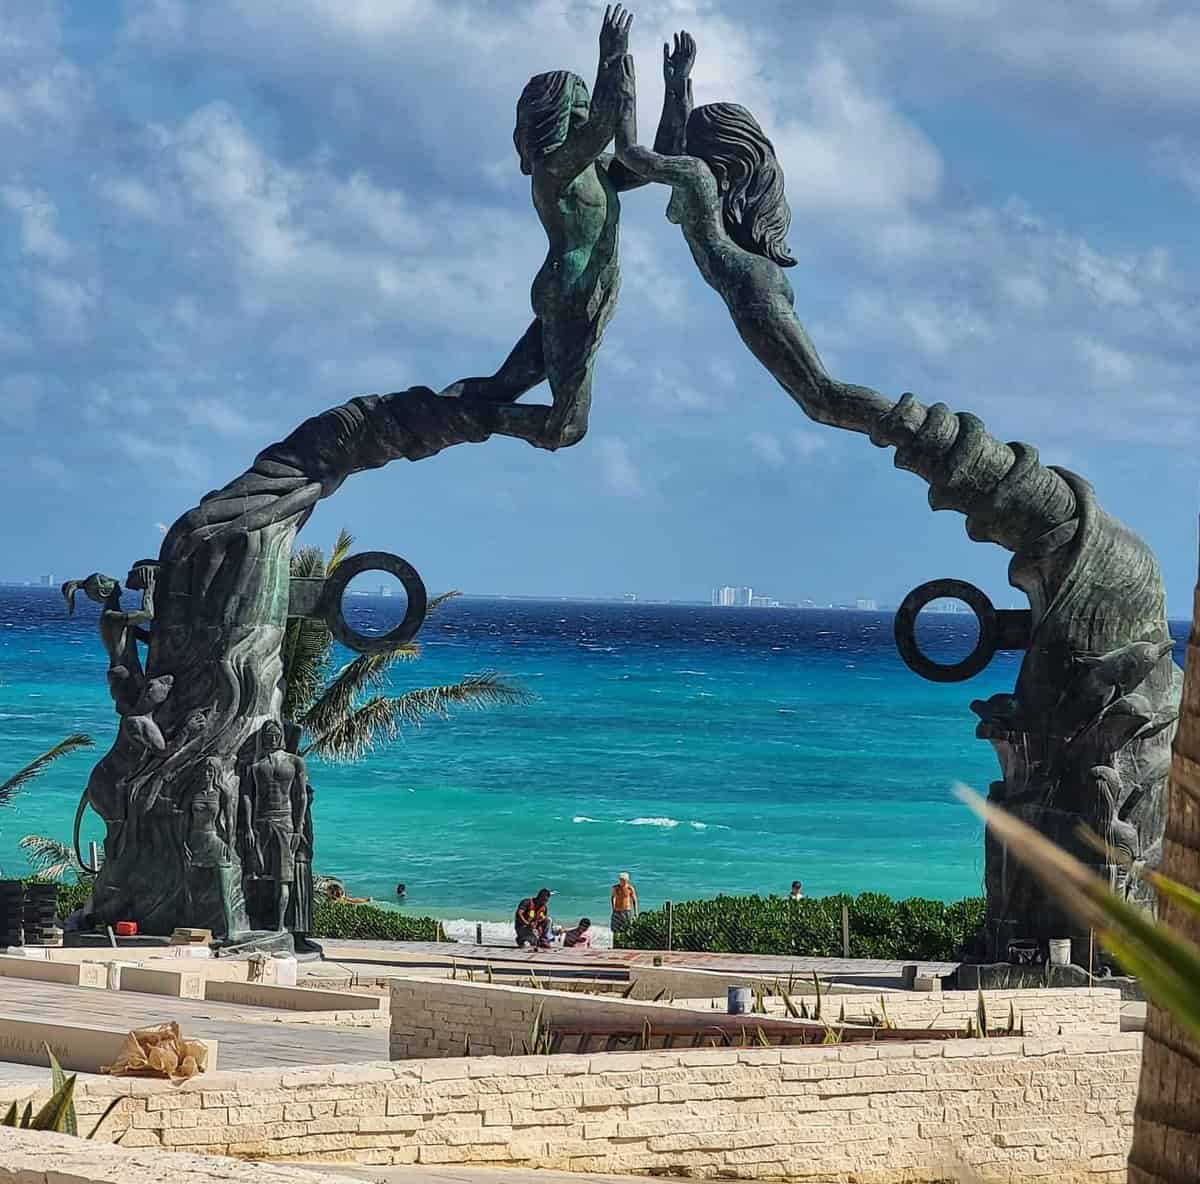 The Portal Maya statue in Founders Park, Playa del Carmen, Quintana Roo, Mexico, with a backdrop of the Caribbean Sea.